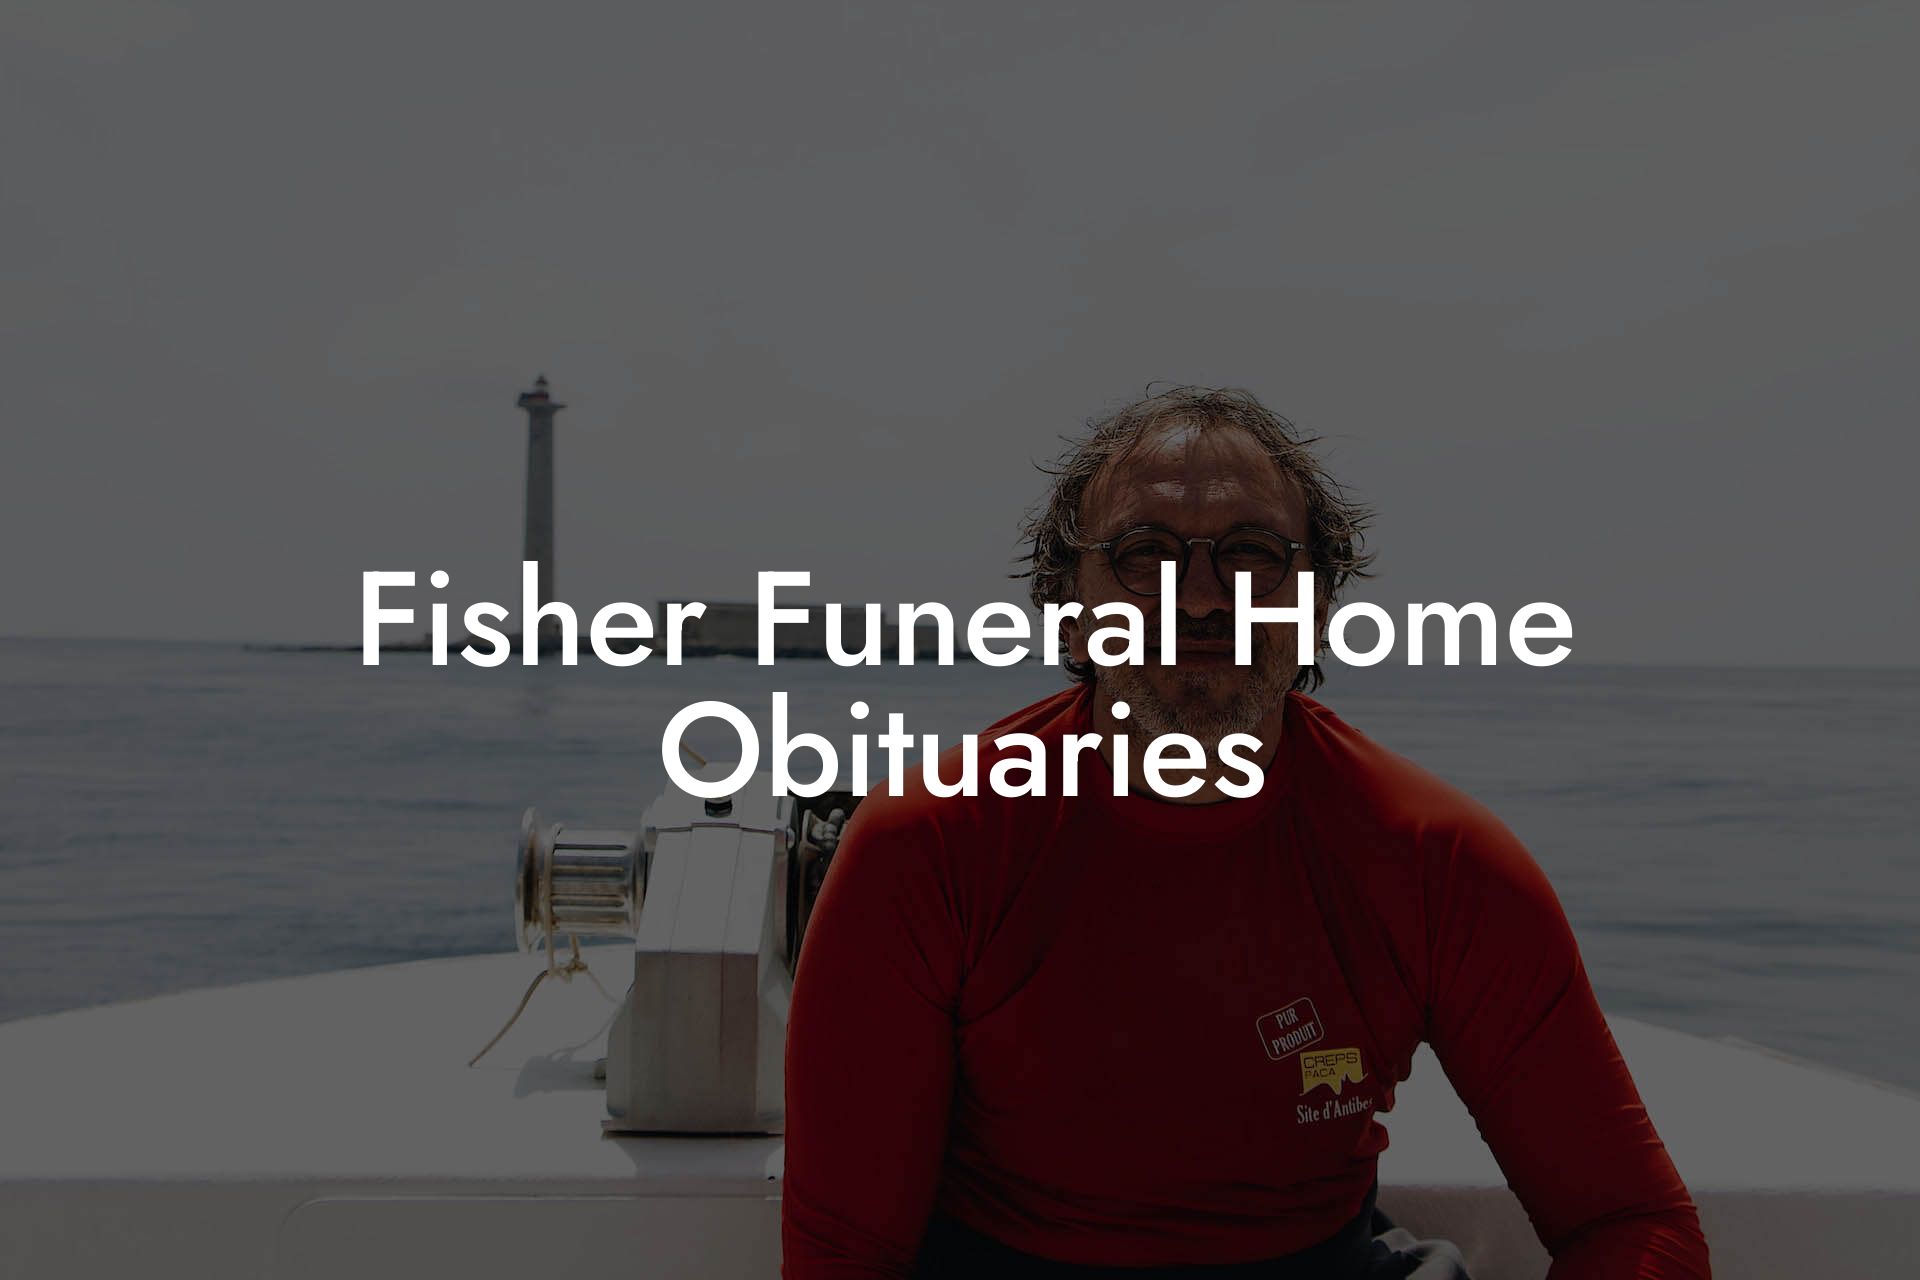 Fisher Funeral Home Obituaries